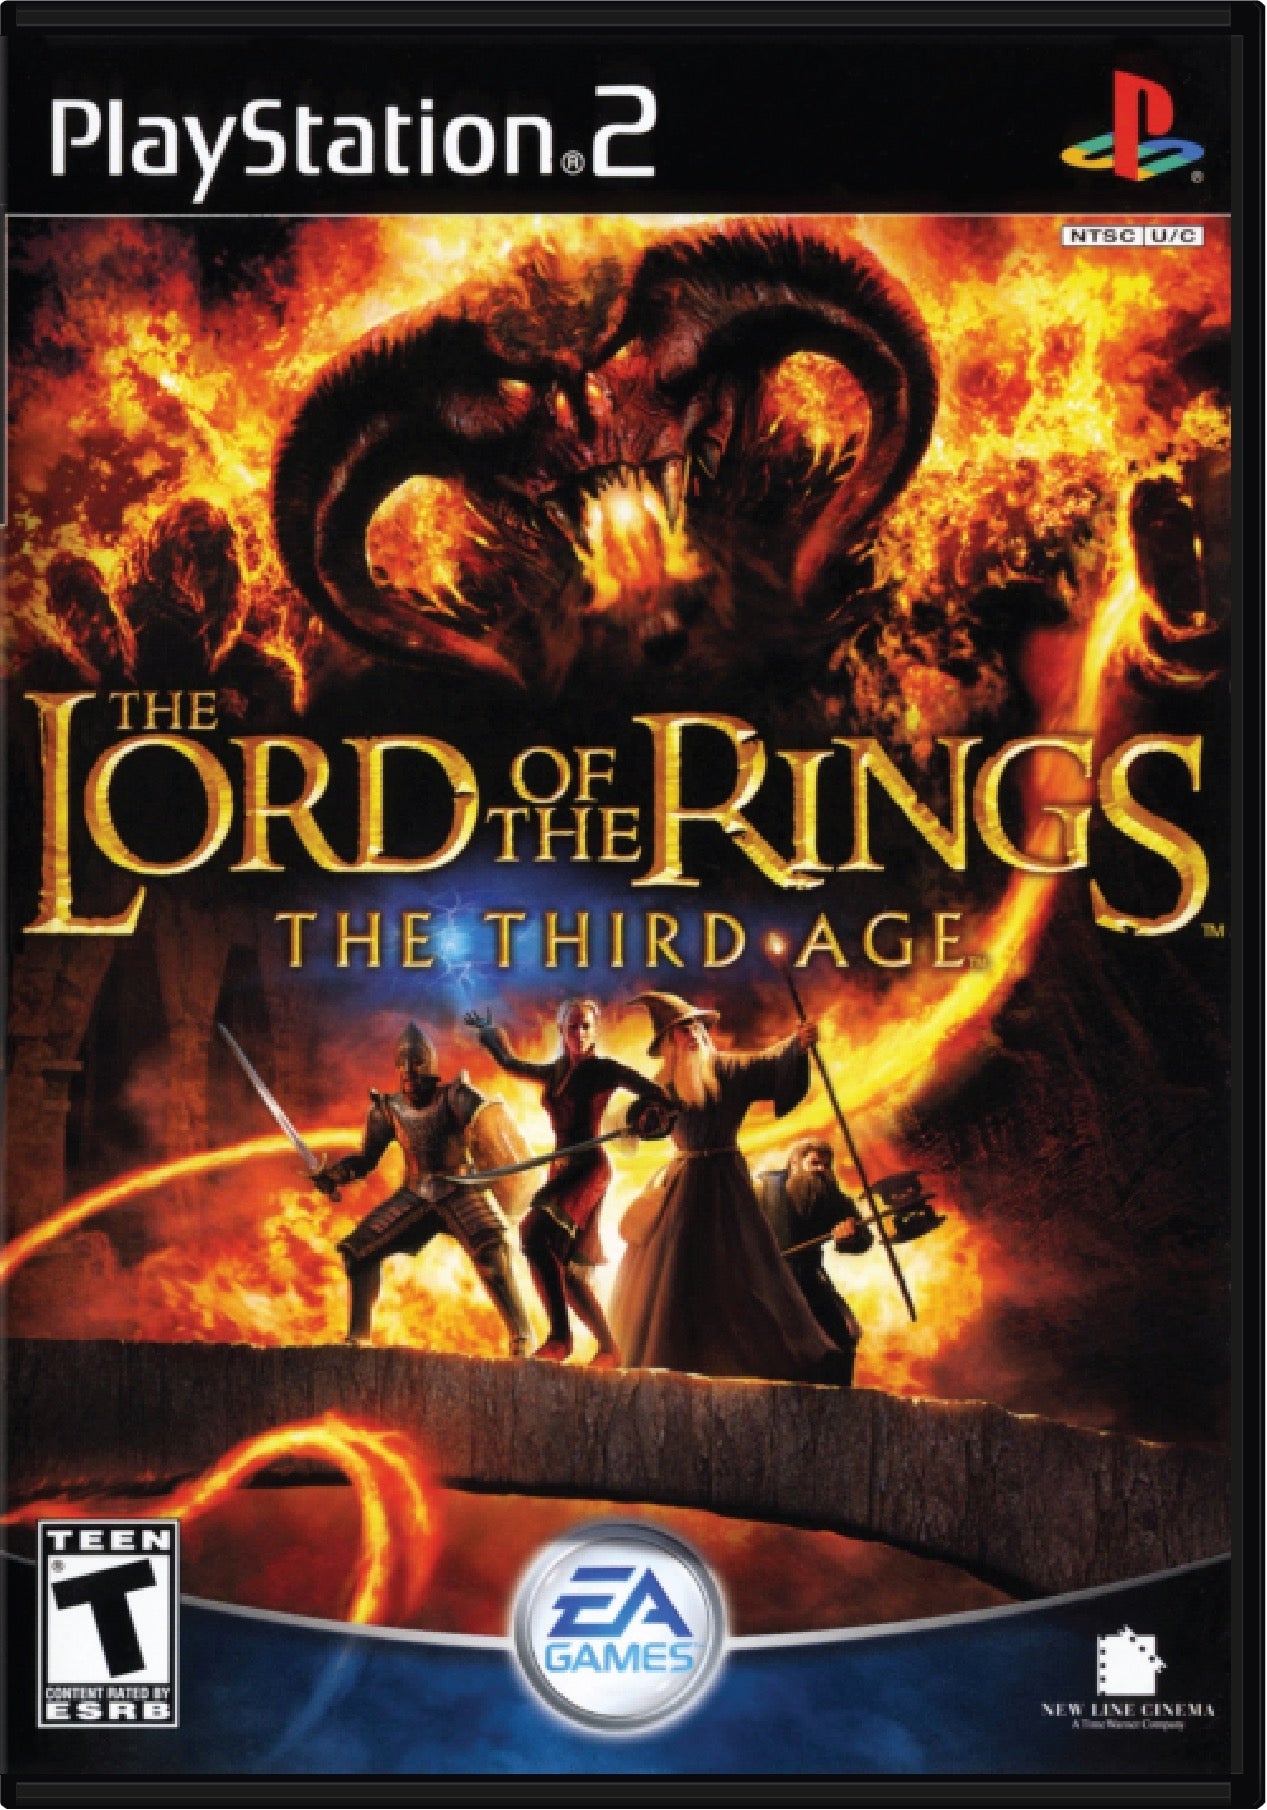 The Lord of the Rings The Third Age Cover Art and Product Photo